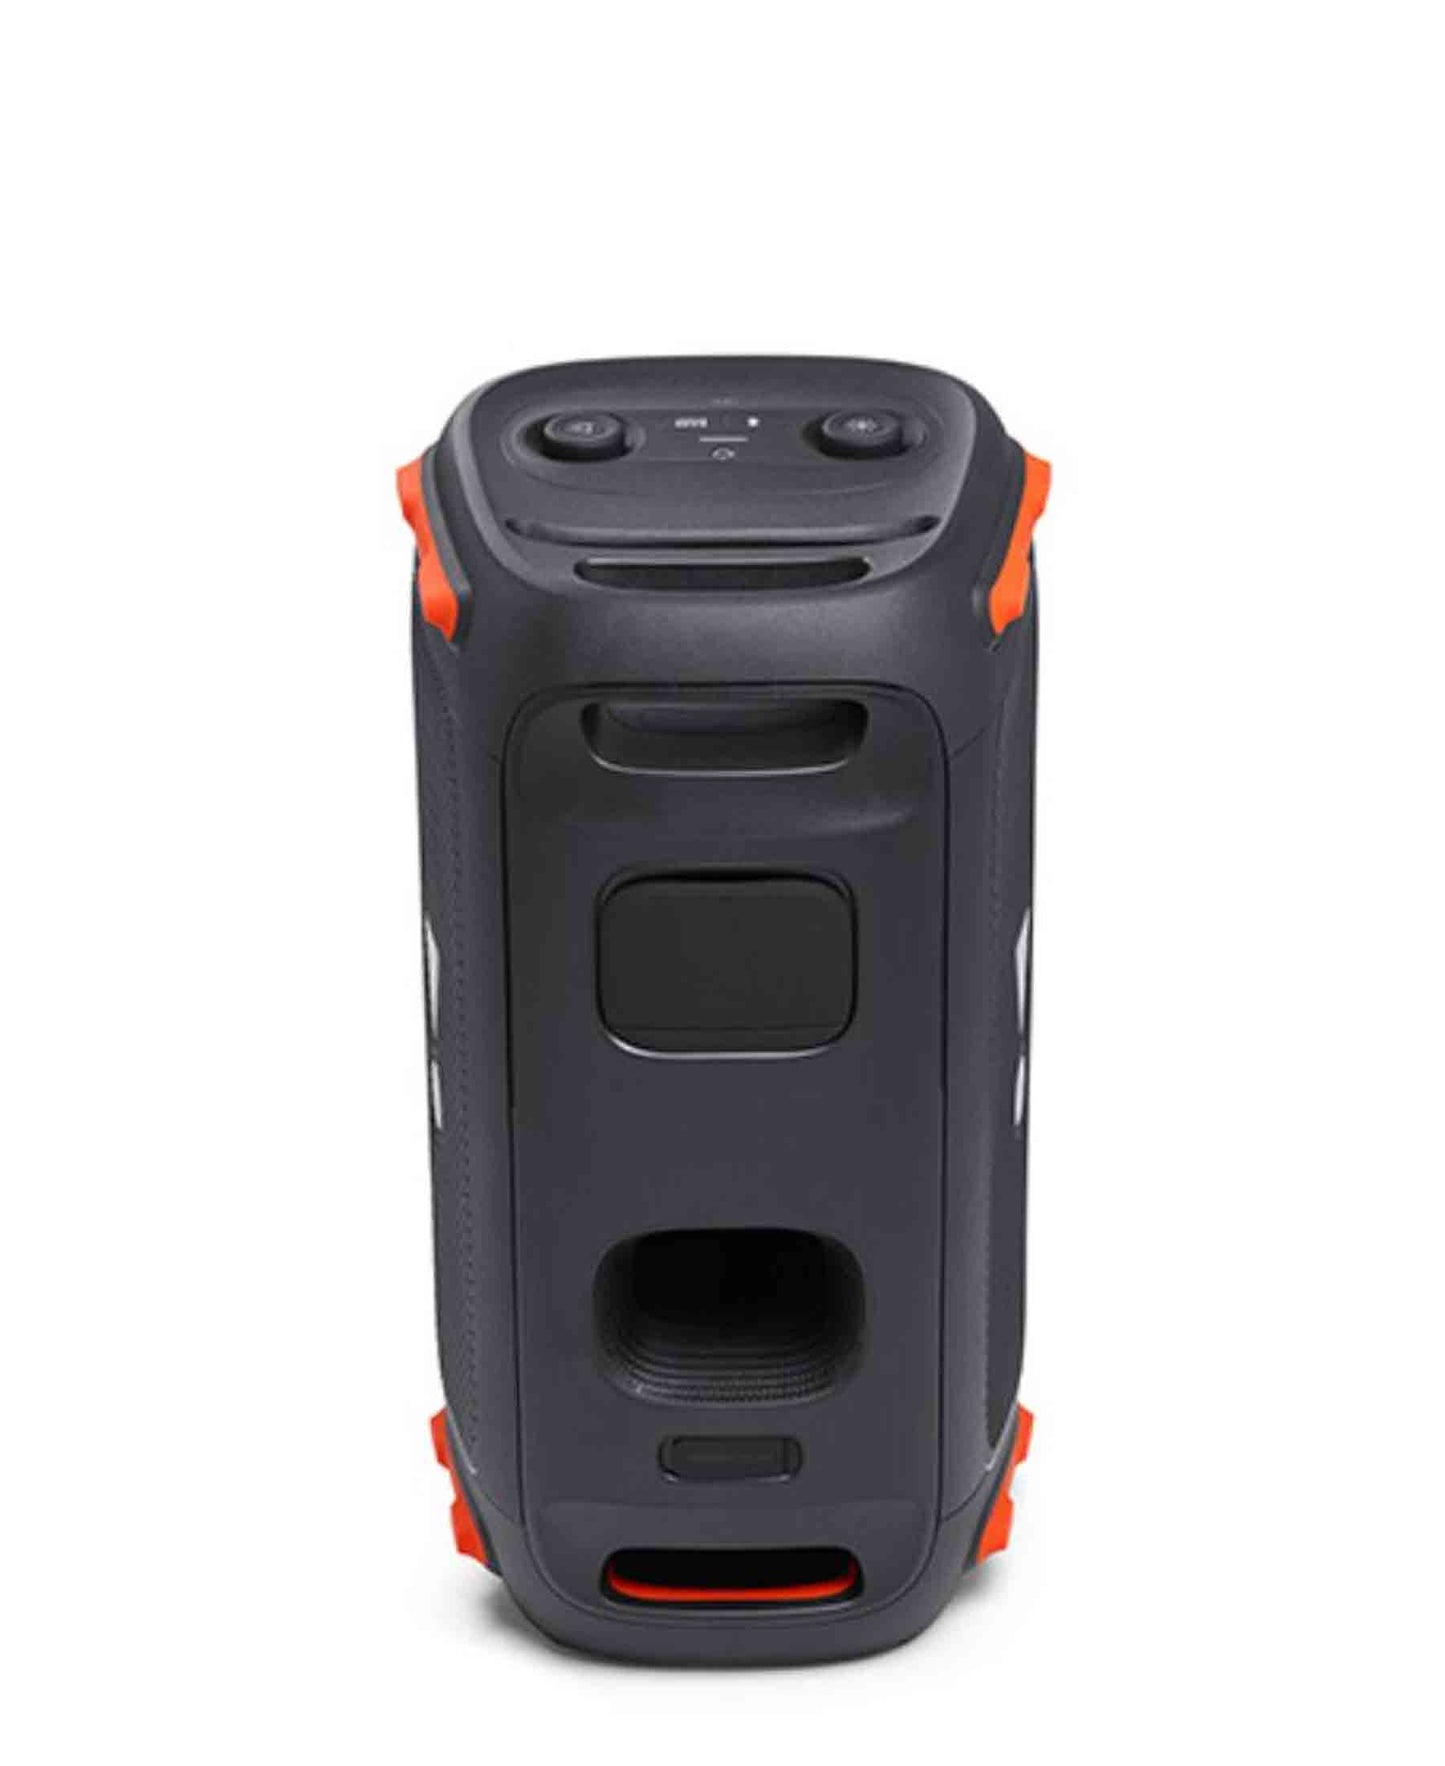 JBL Partybox 110 Portable Party Speaker OH4379